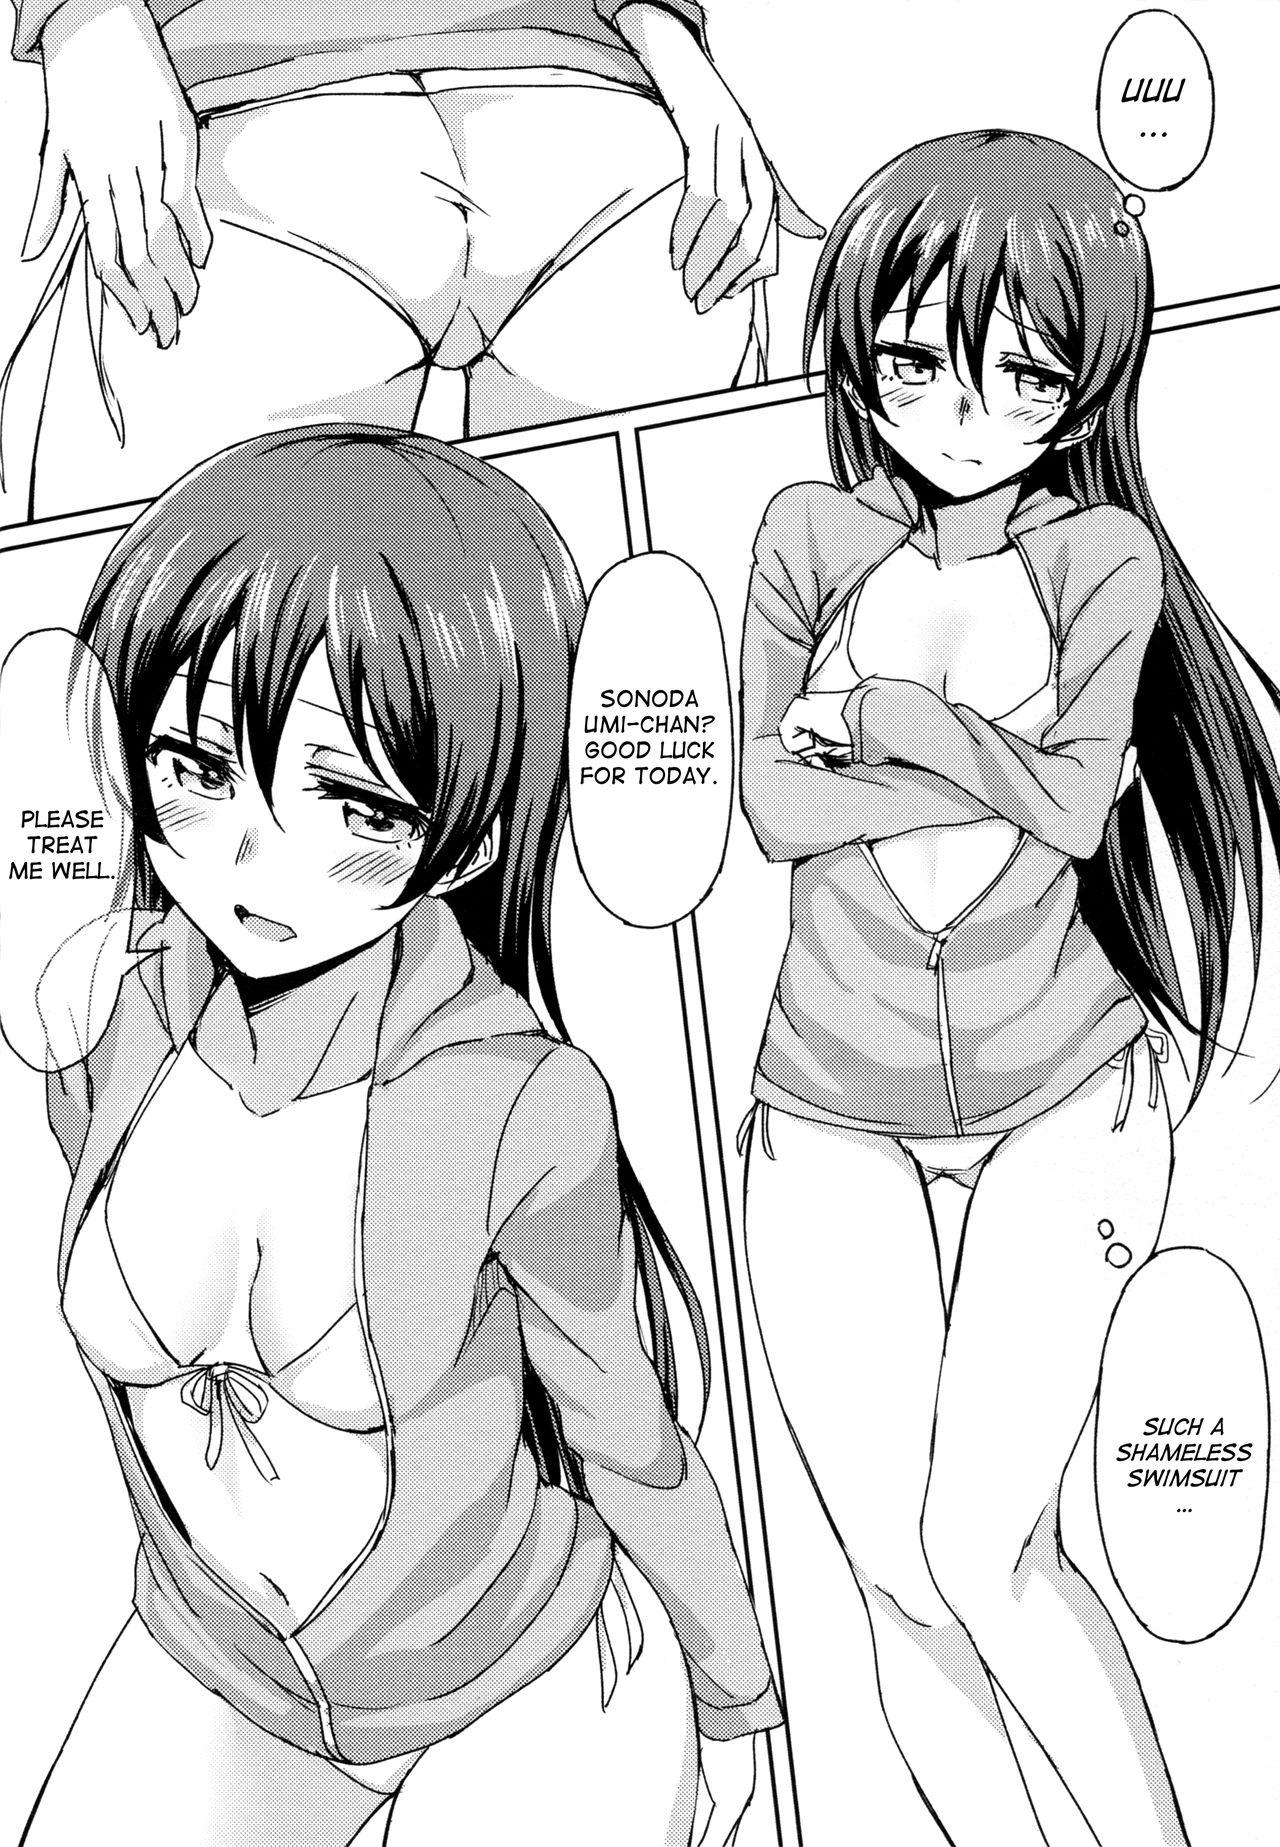 Hotfuck Hah,Wrench This! - Love live Ddf Porn - Page 6